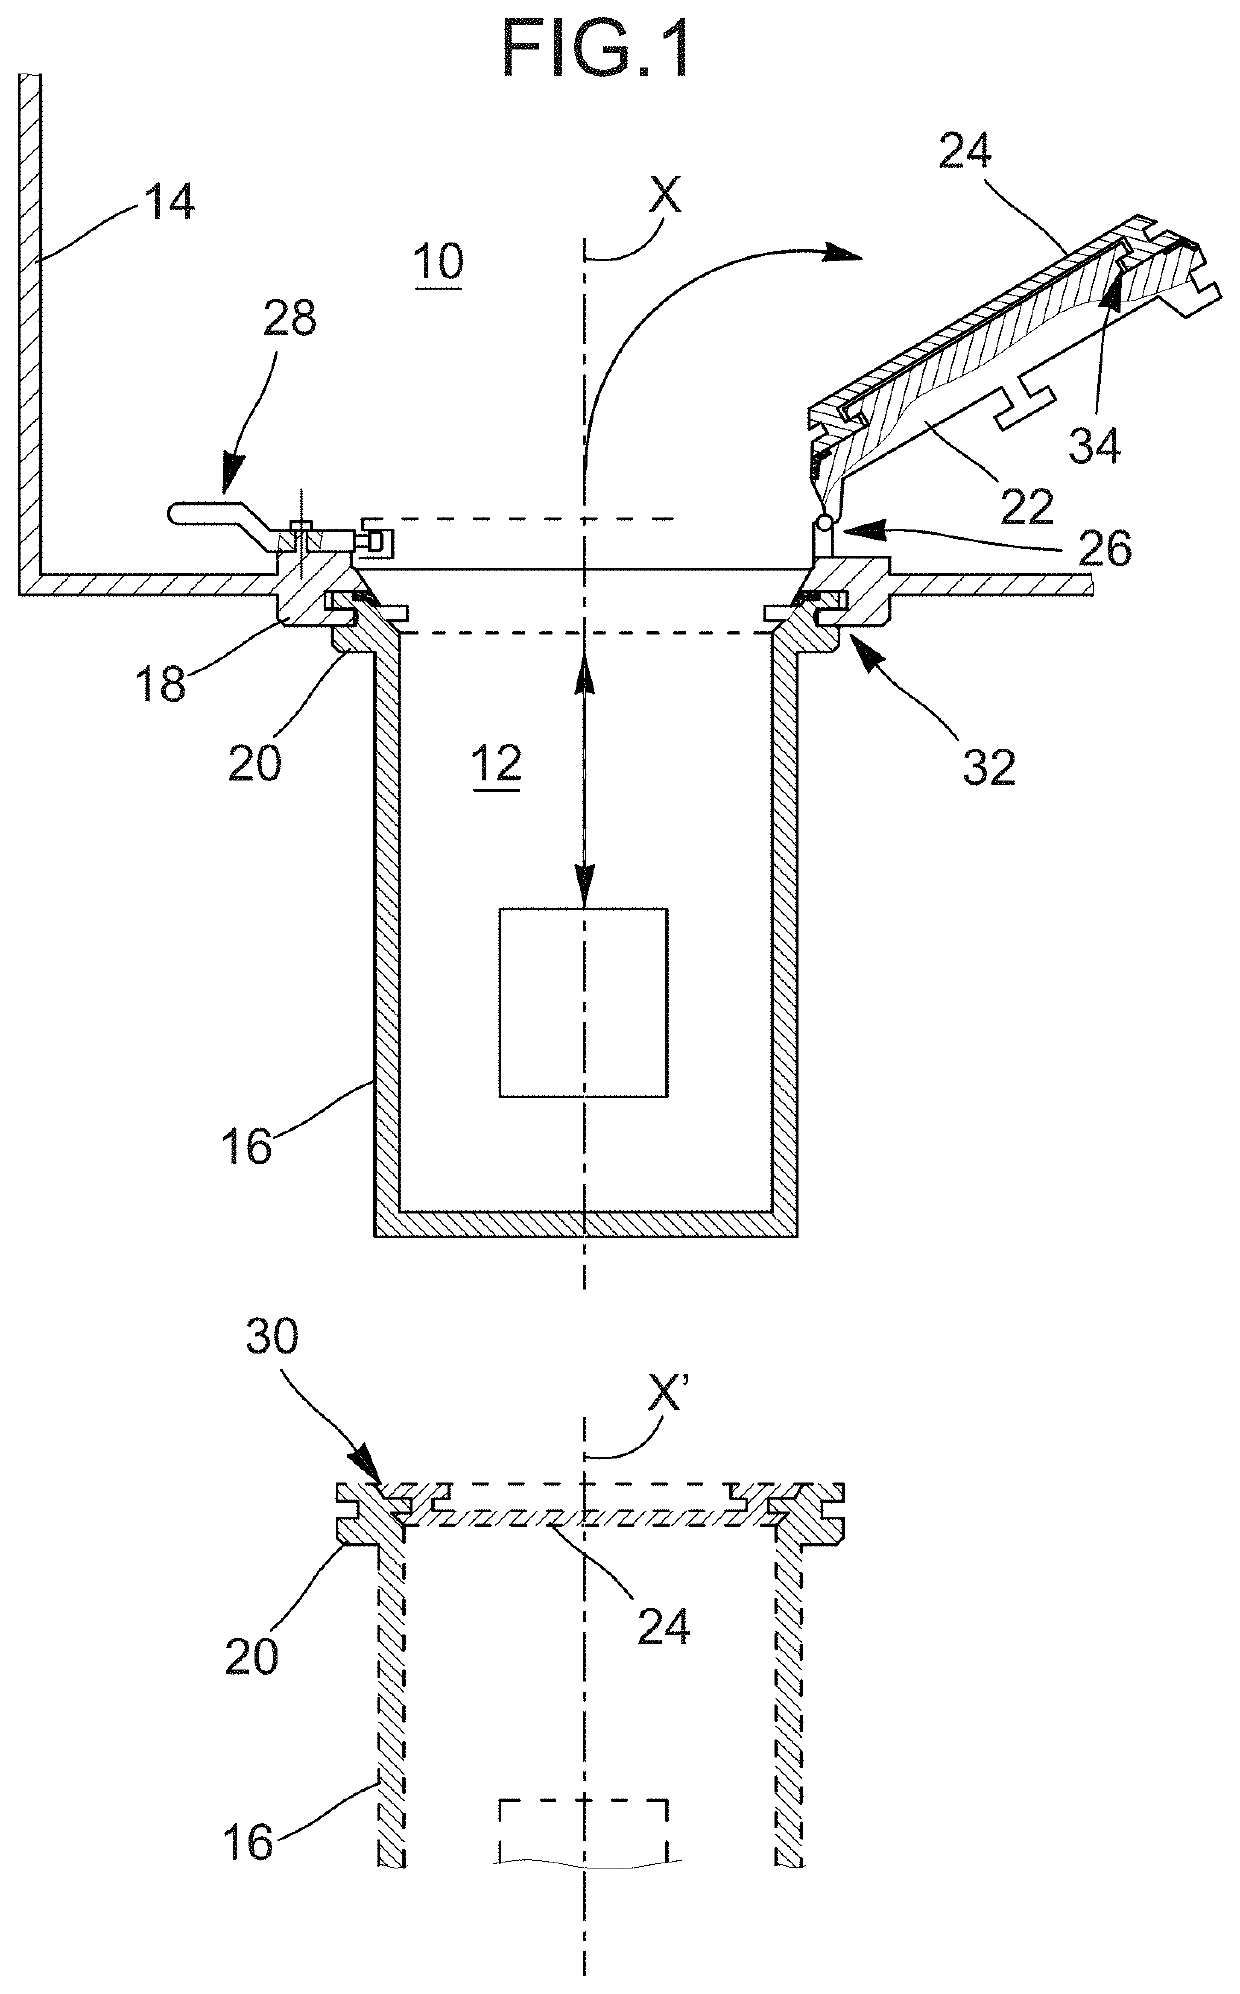 System sealing test device for insulating two mediums in a sealed manner